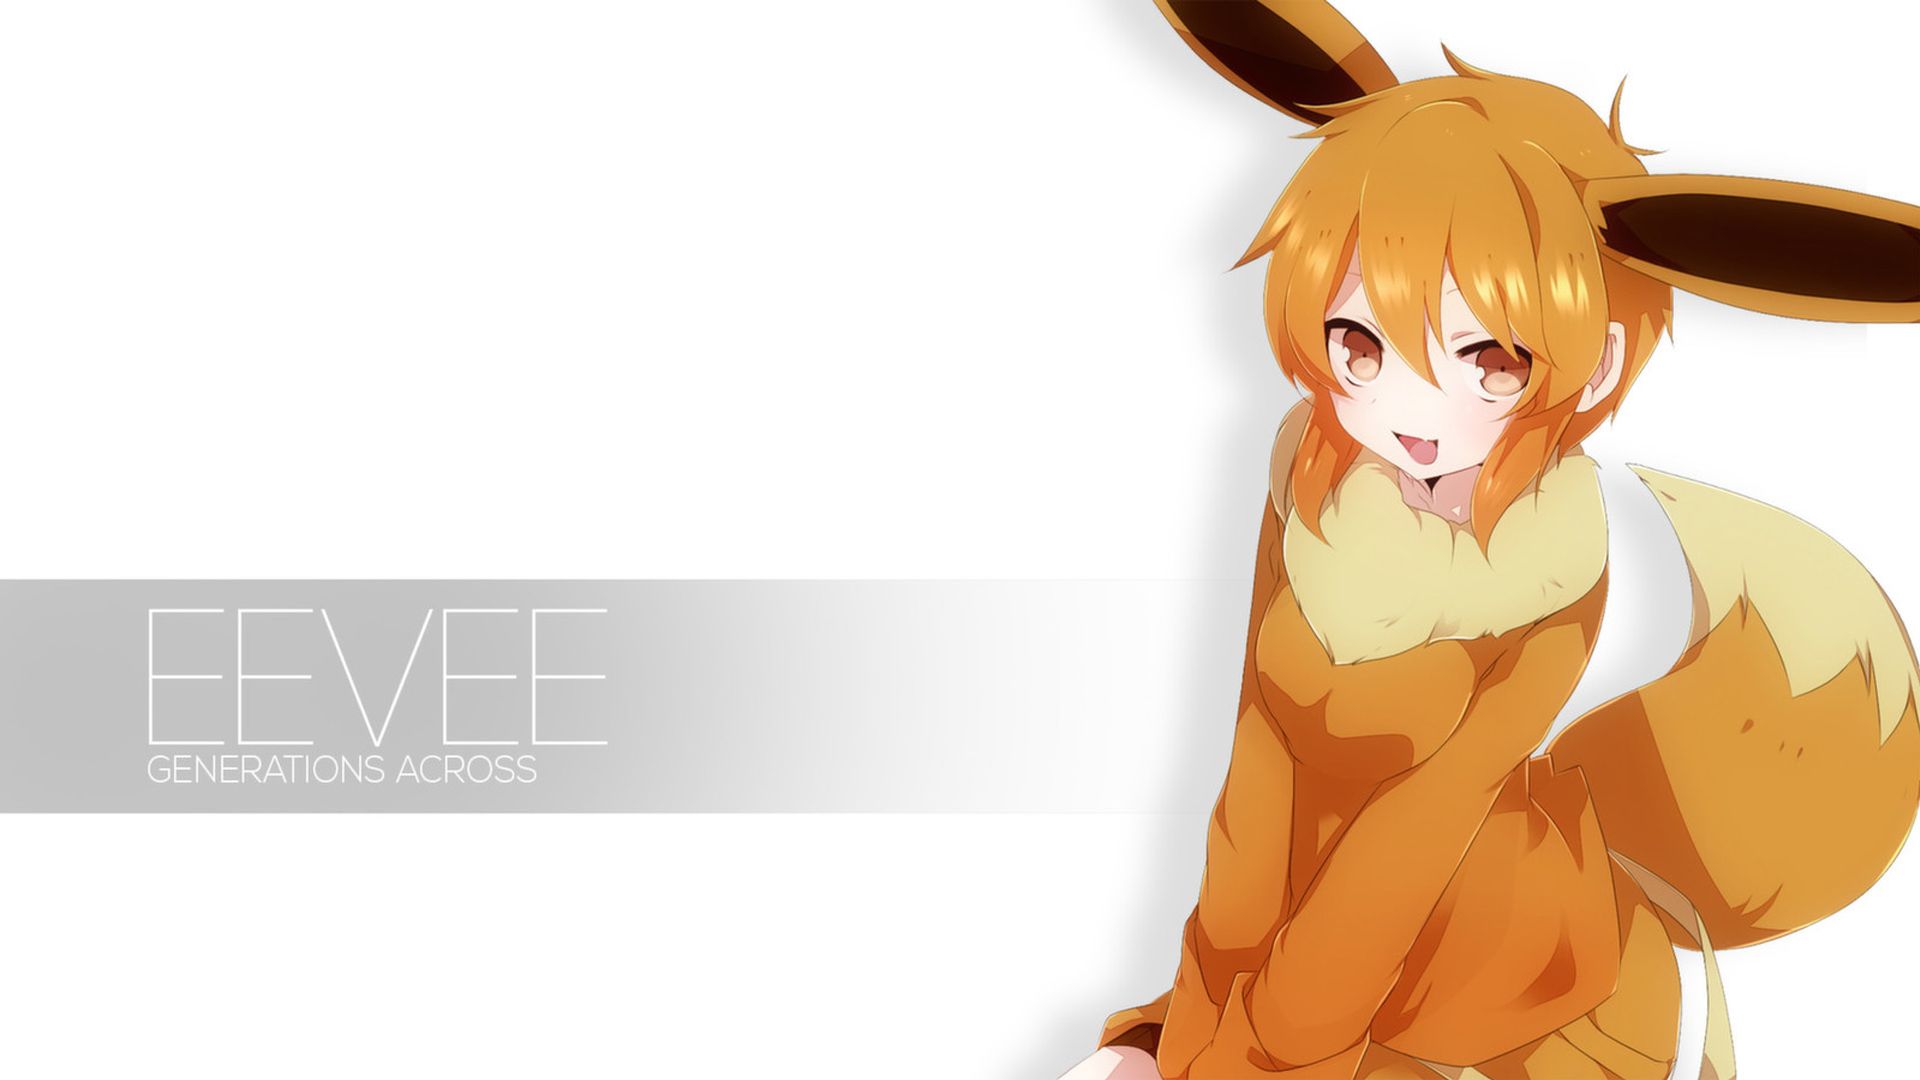 Eevee (Pokémon) wallpapers for desktop, download free Eevee (Pokémon)  pictures and backgrounds for PC 